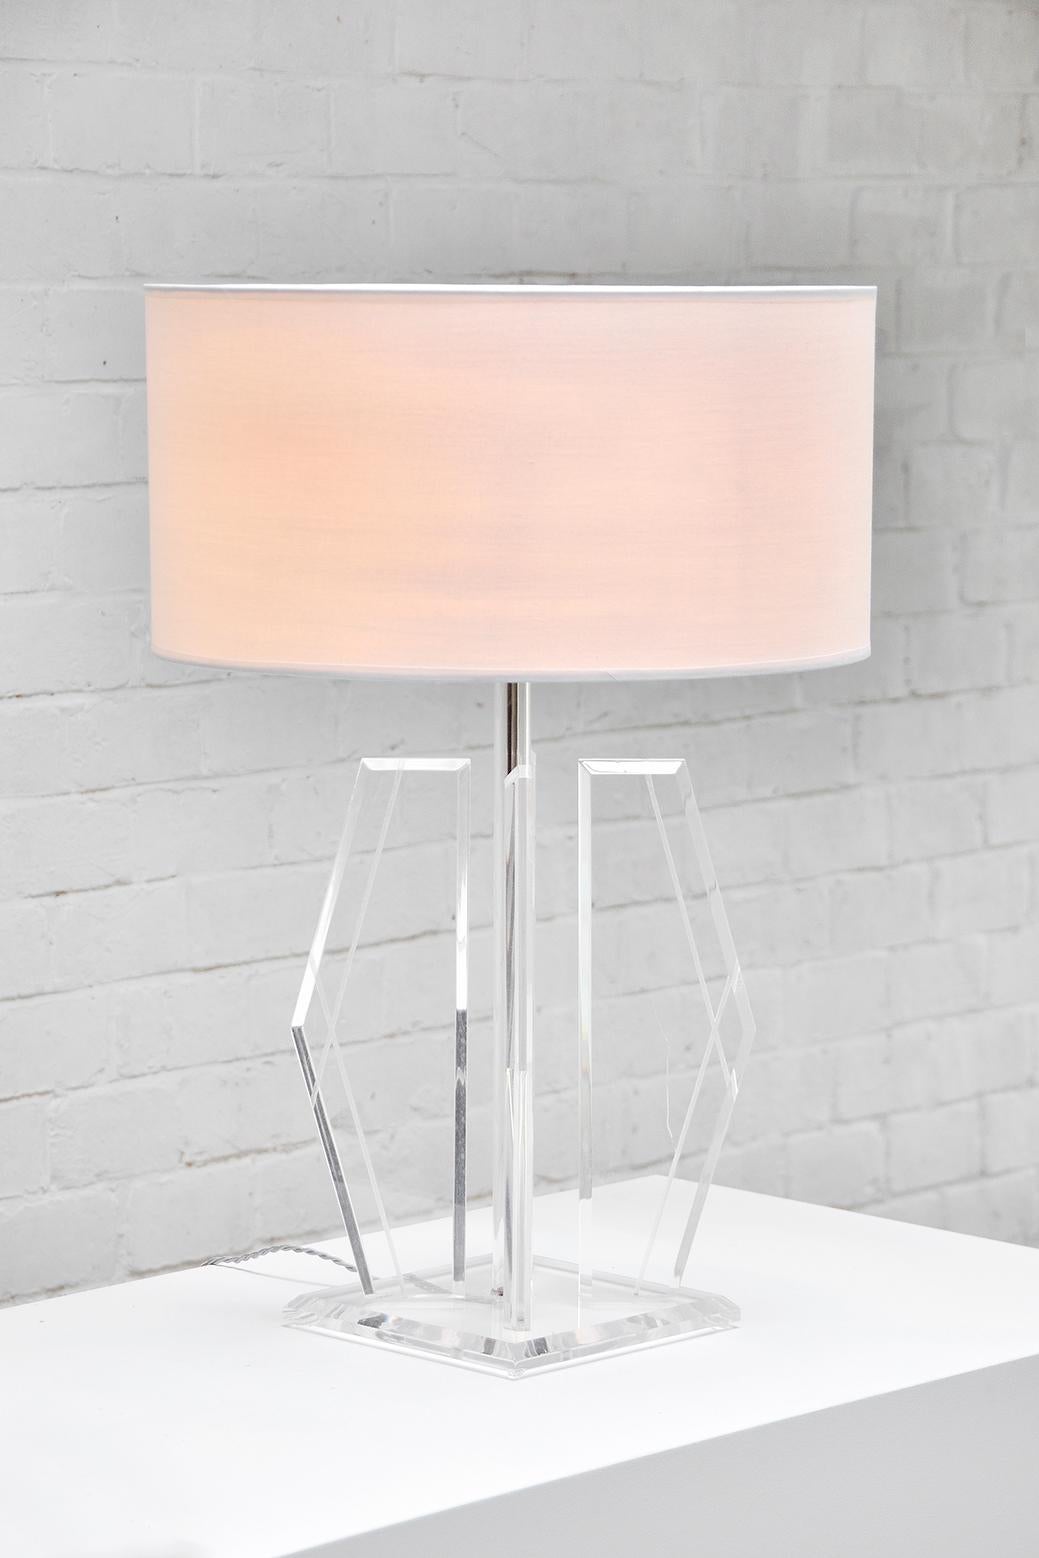 Spectacular and large sculptural table or desk lamp made of solid heavy acrylic glass. Mady by Hivo Van Teal in the 70's. The lamp body is sculptural/angular shaped and sitting on top of a elegant acrylic glass base. The body and base are topped